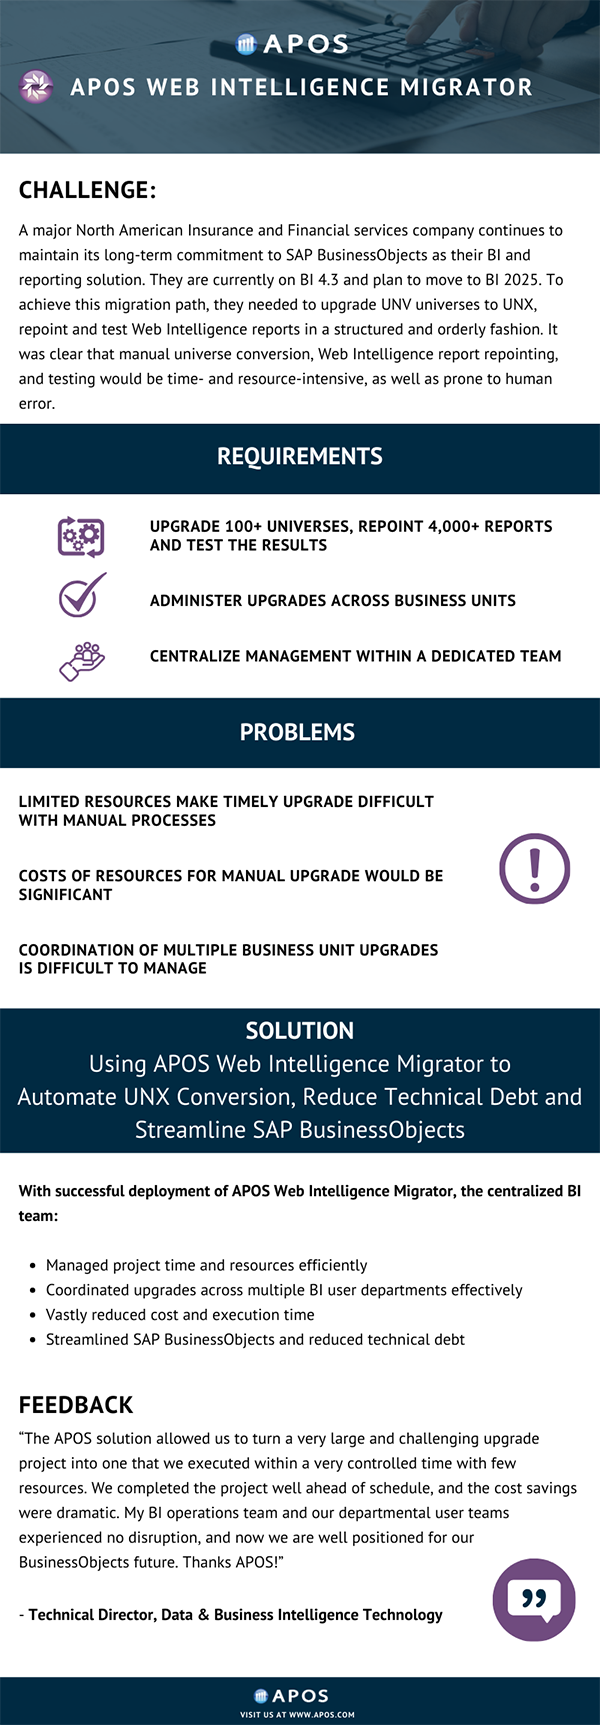 APOS Web Intelligence Migrator - Multinational Financial Institution - UNV to UNX